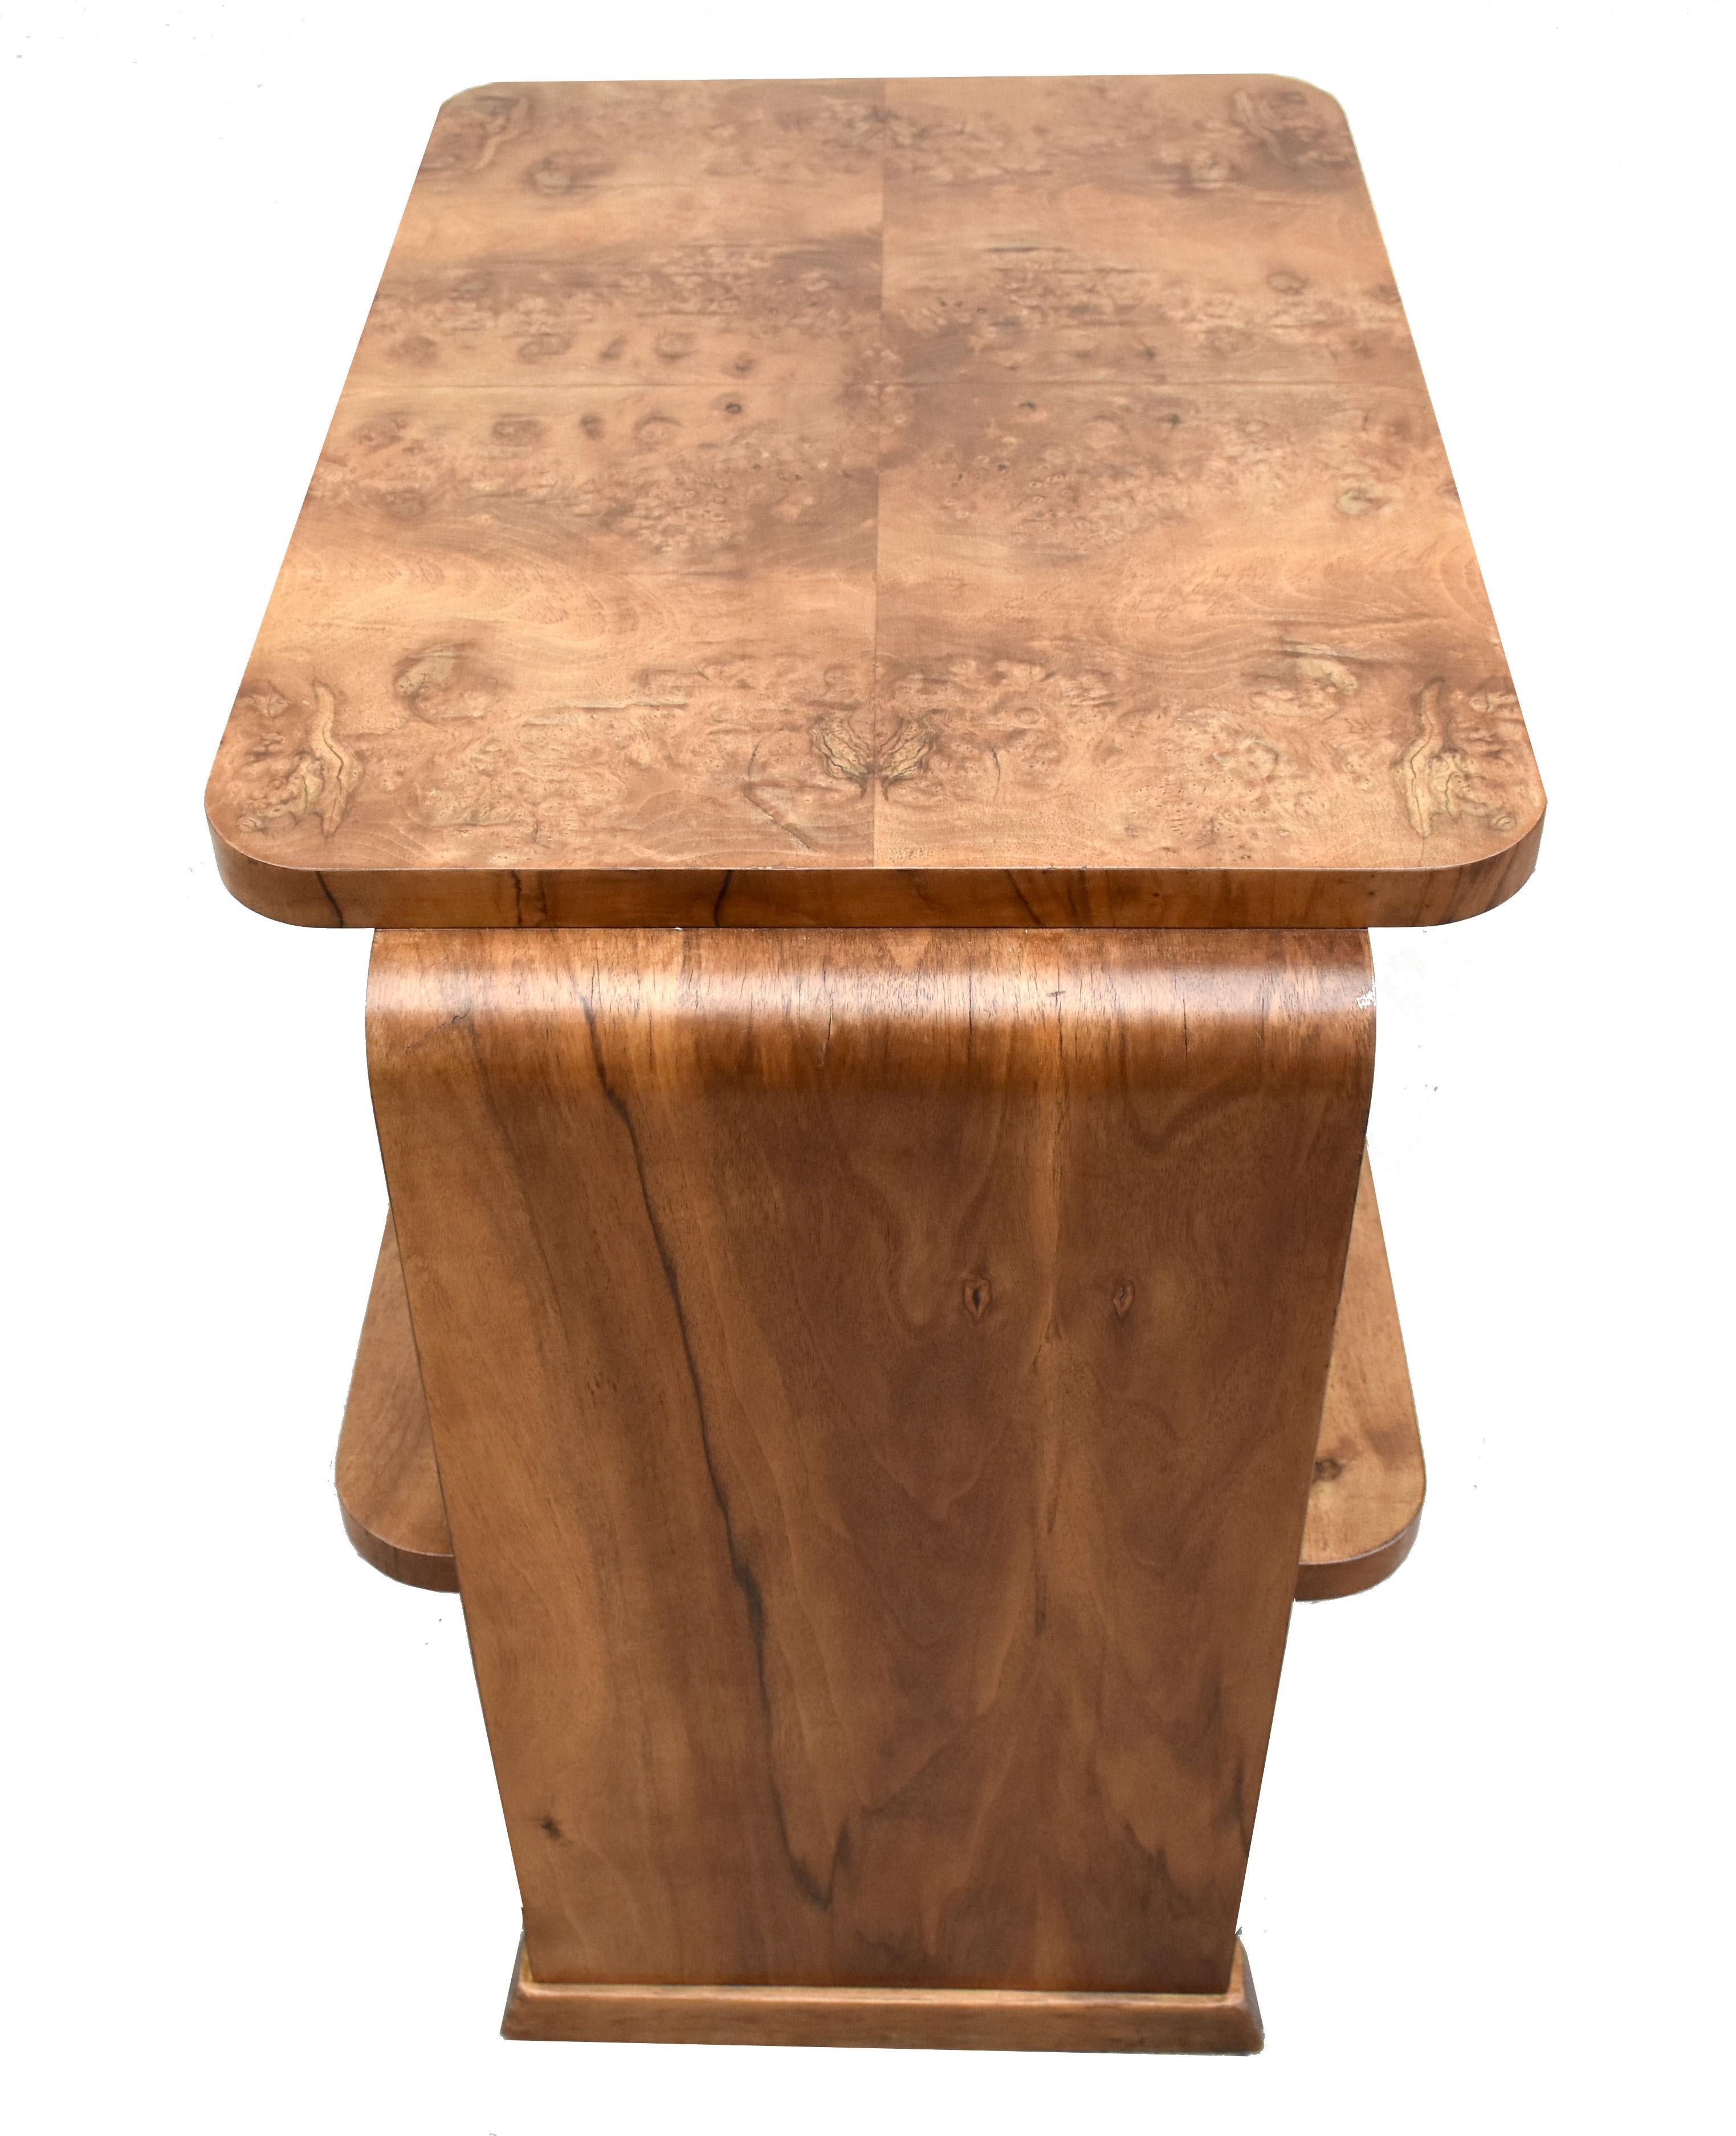 20th Century Art Deco Large Modernist Two Tier Blonde Walnut Occasional Table, circa 1930 For Sale